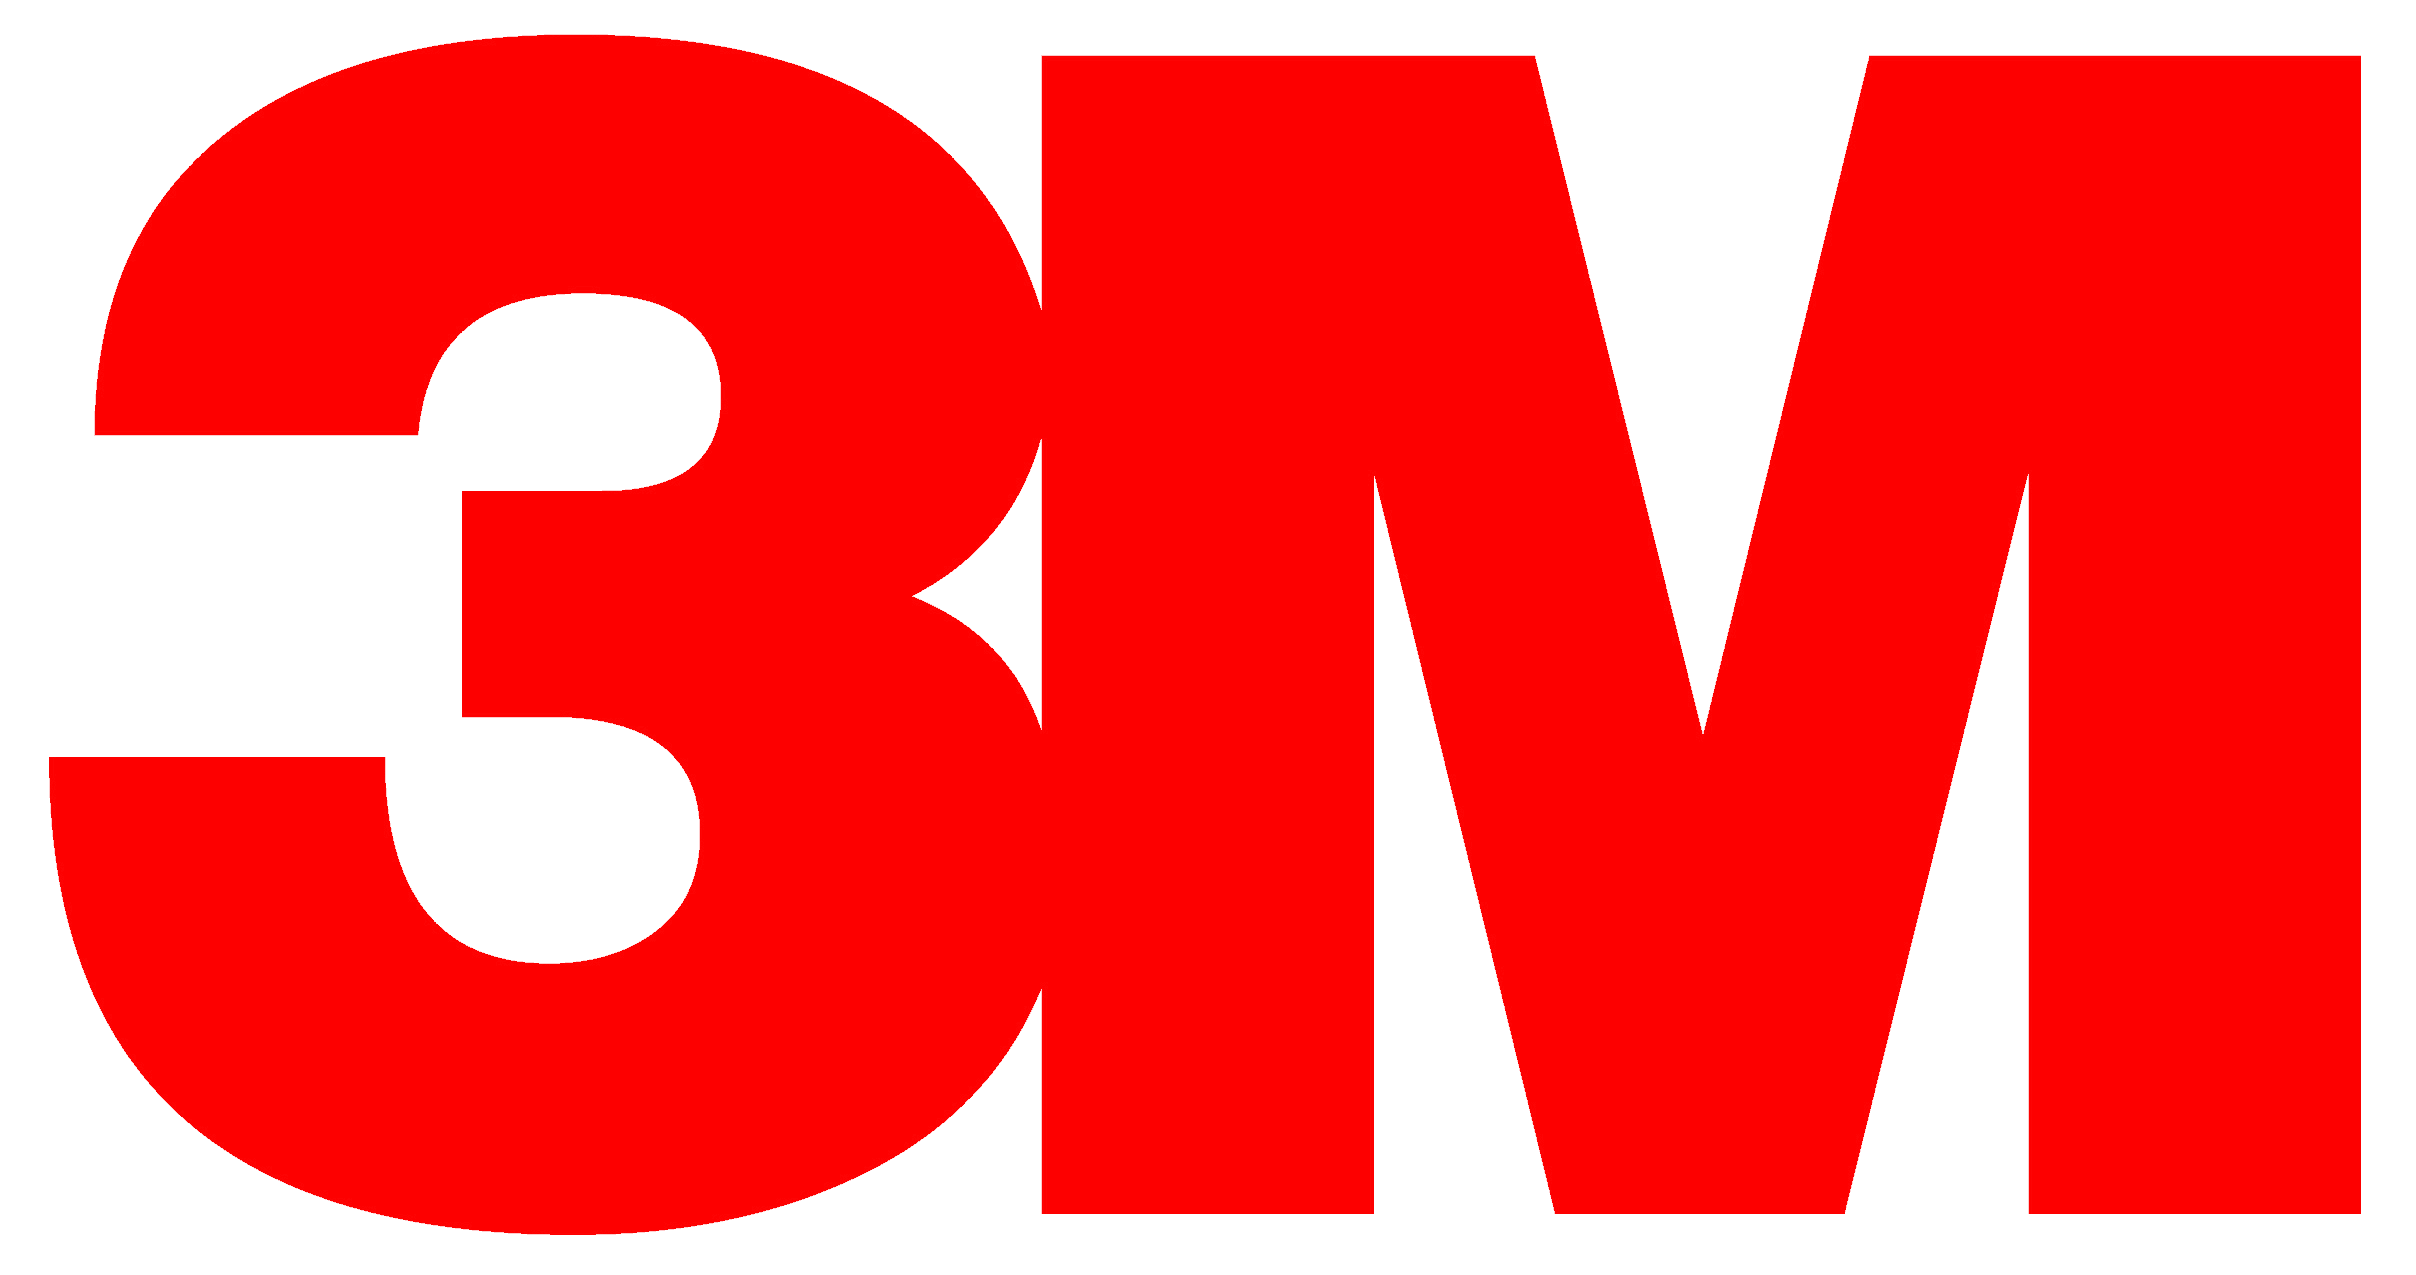 3m logo on a red background for technology startups.